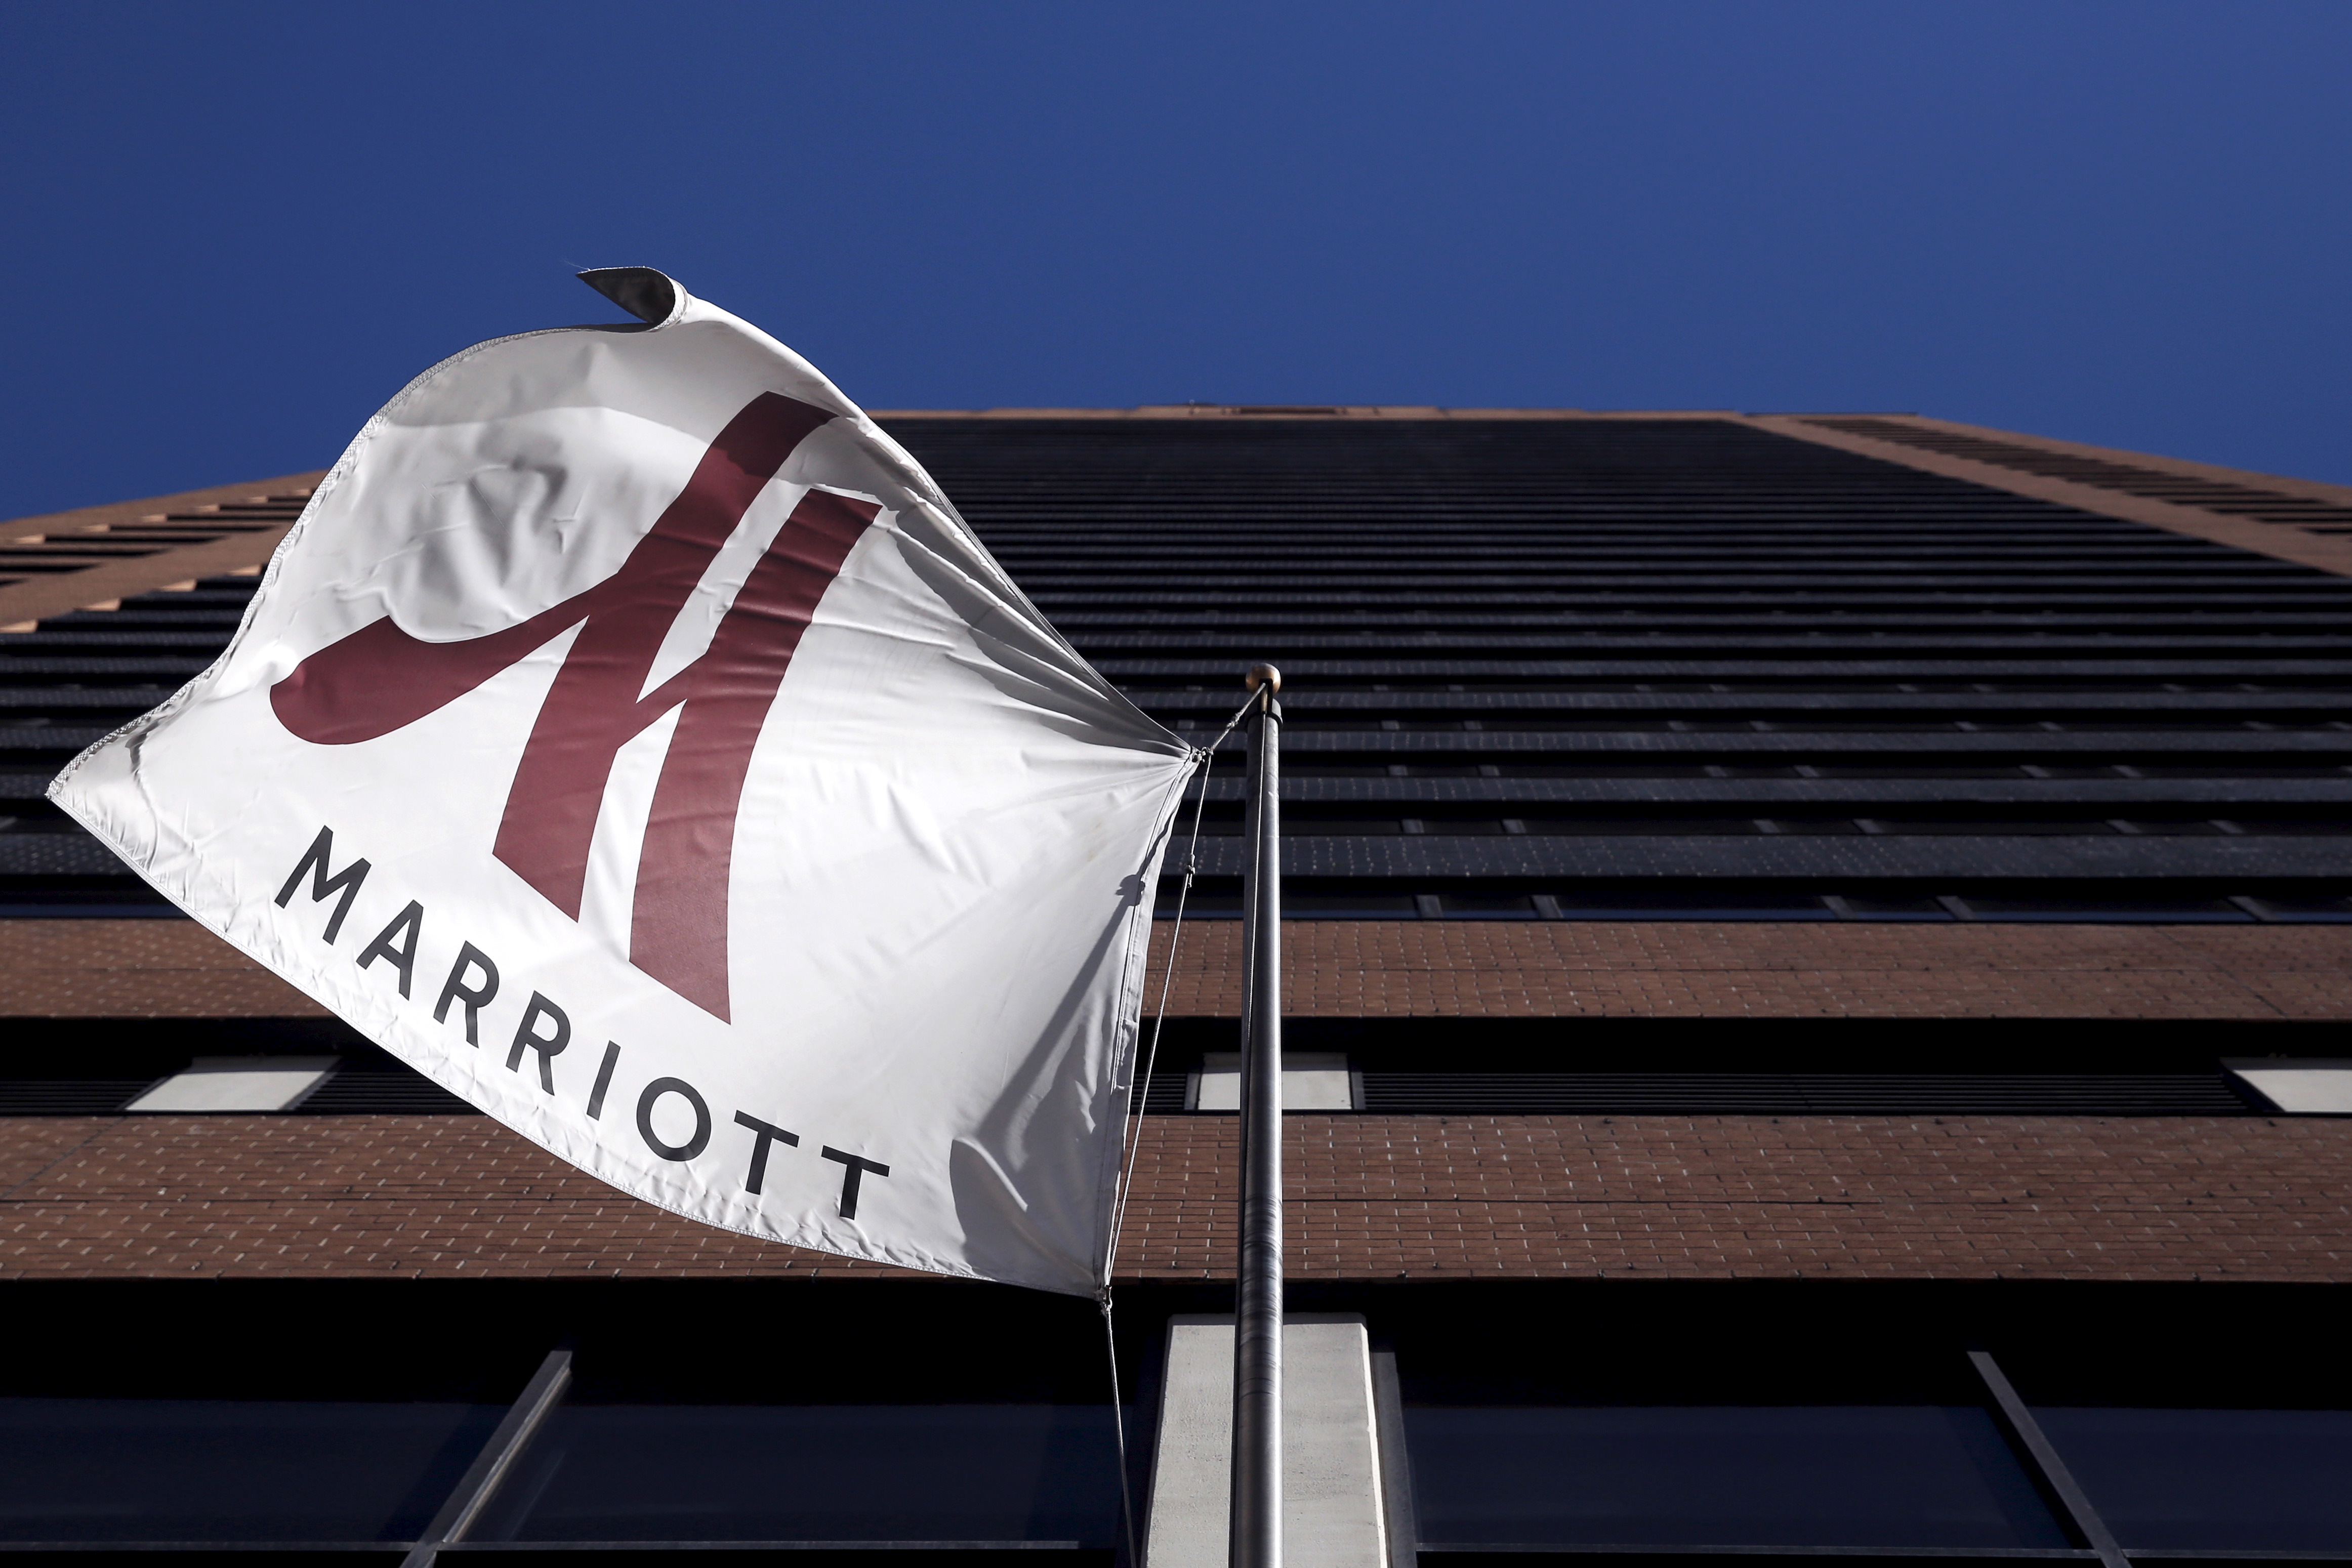 A Marriott flag hangs at the entrance of the New York Marriott Downtown hotel in Manhattan, New York